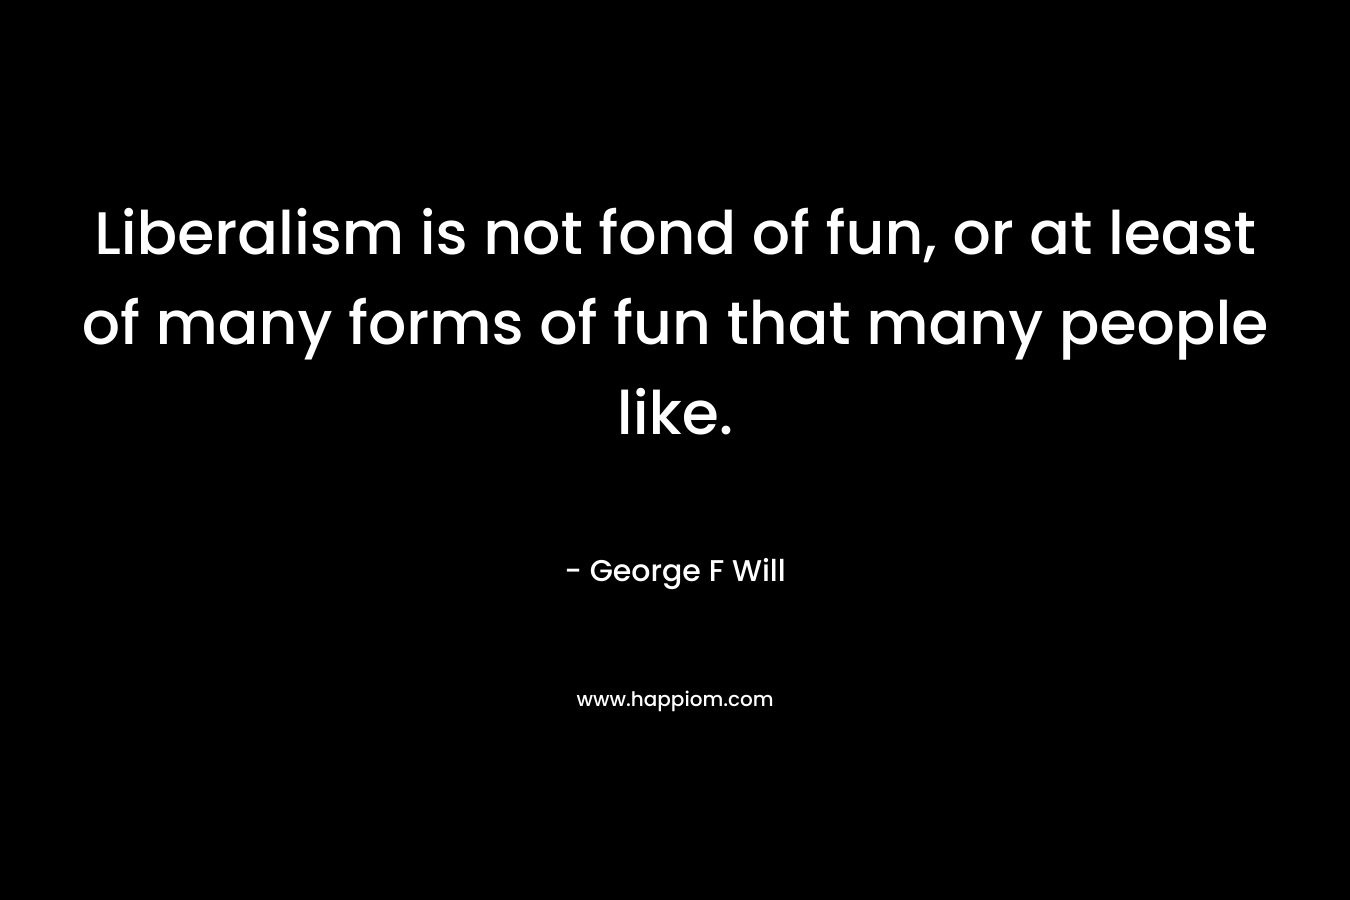 Liberalism is not fond of fun, or at least of many forms of fun that many people like. – George F Will